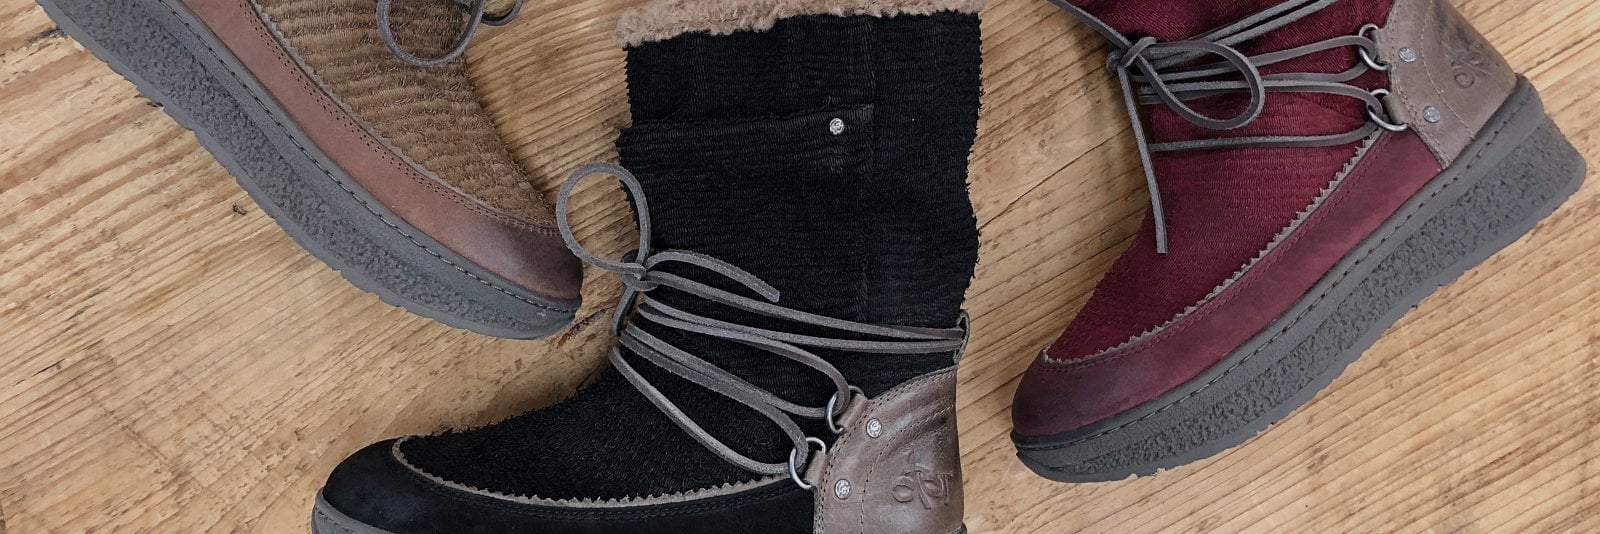 Sale-Priced Cold Weather Boots